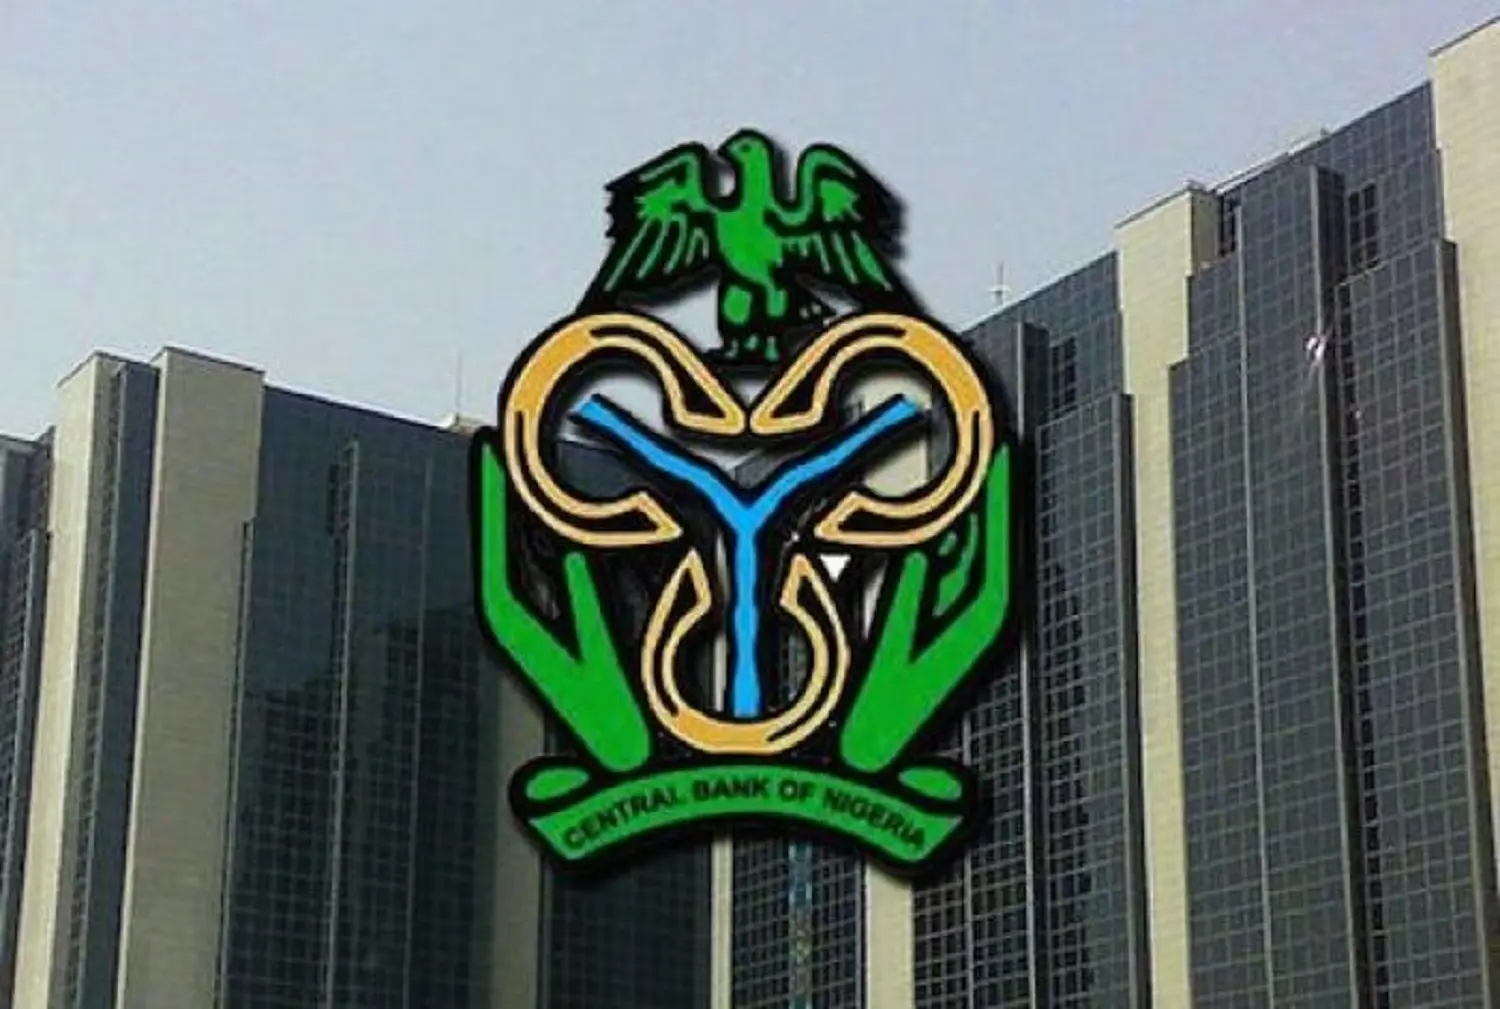 CBN’s intervention loans for economic recovery hit N3tn –Emefiele